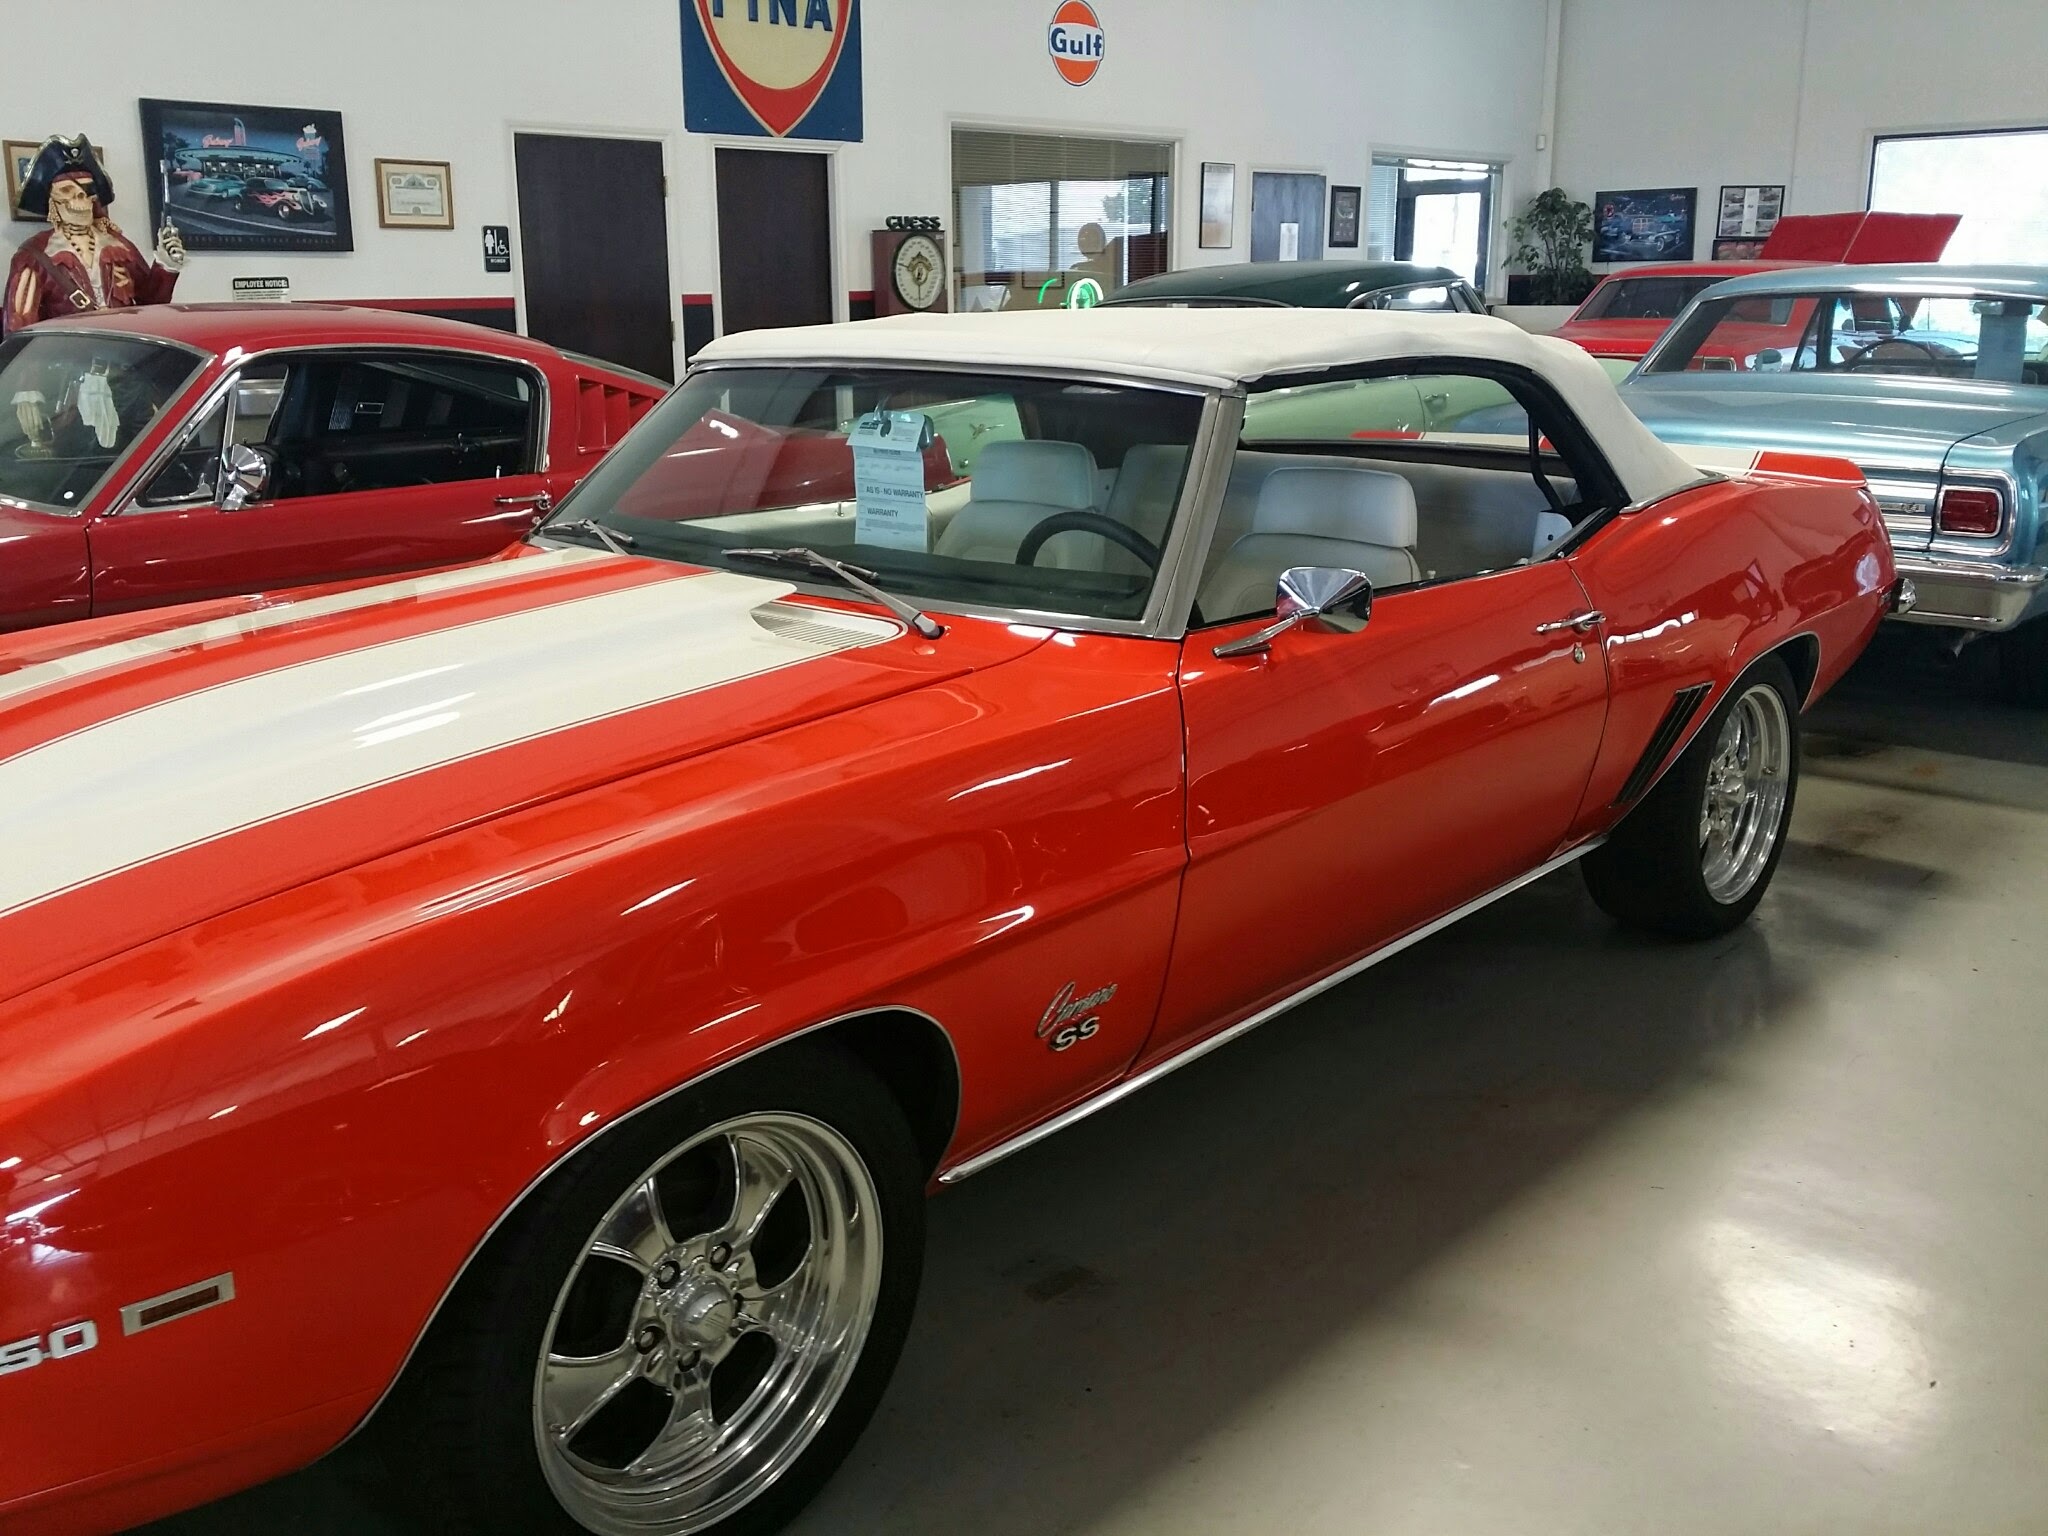 A classic red convertible with white racing stripes and polished chrome wheels parked indoors, surrounded by other vintage cars in a showroom.